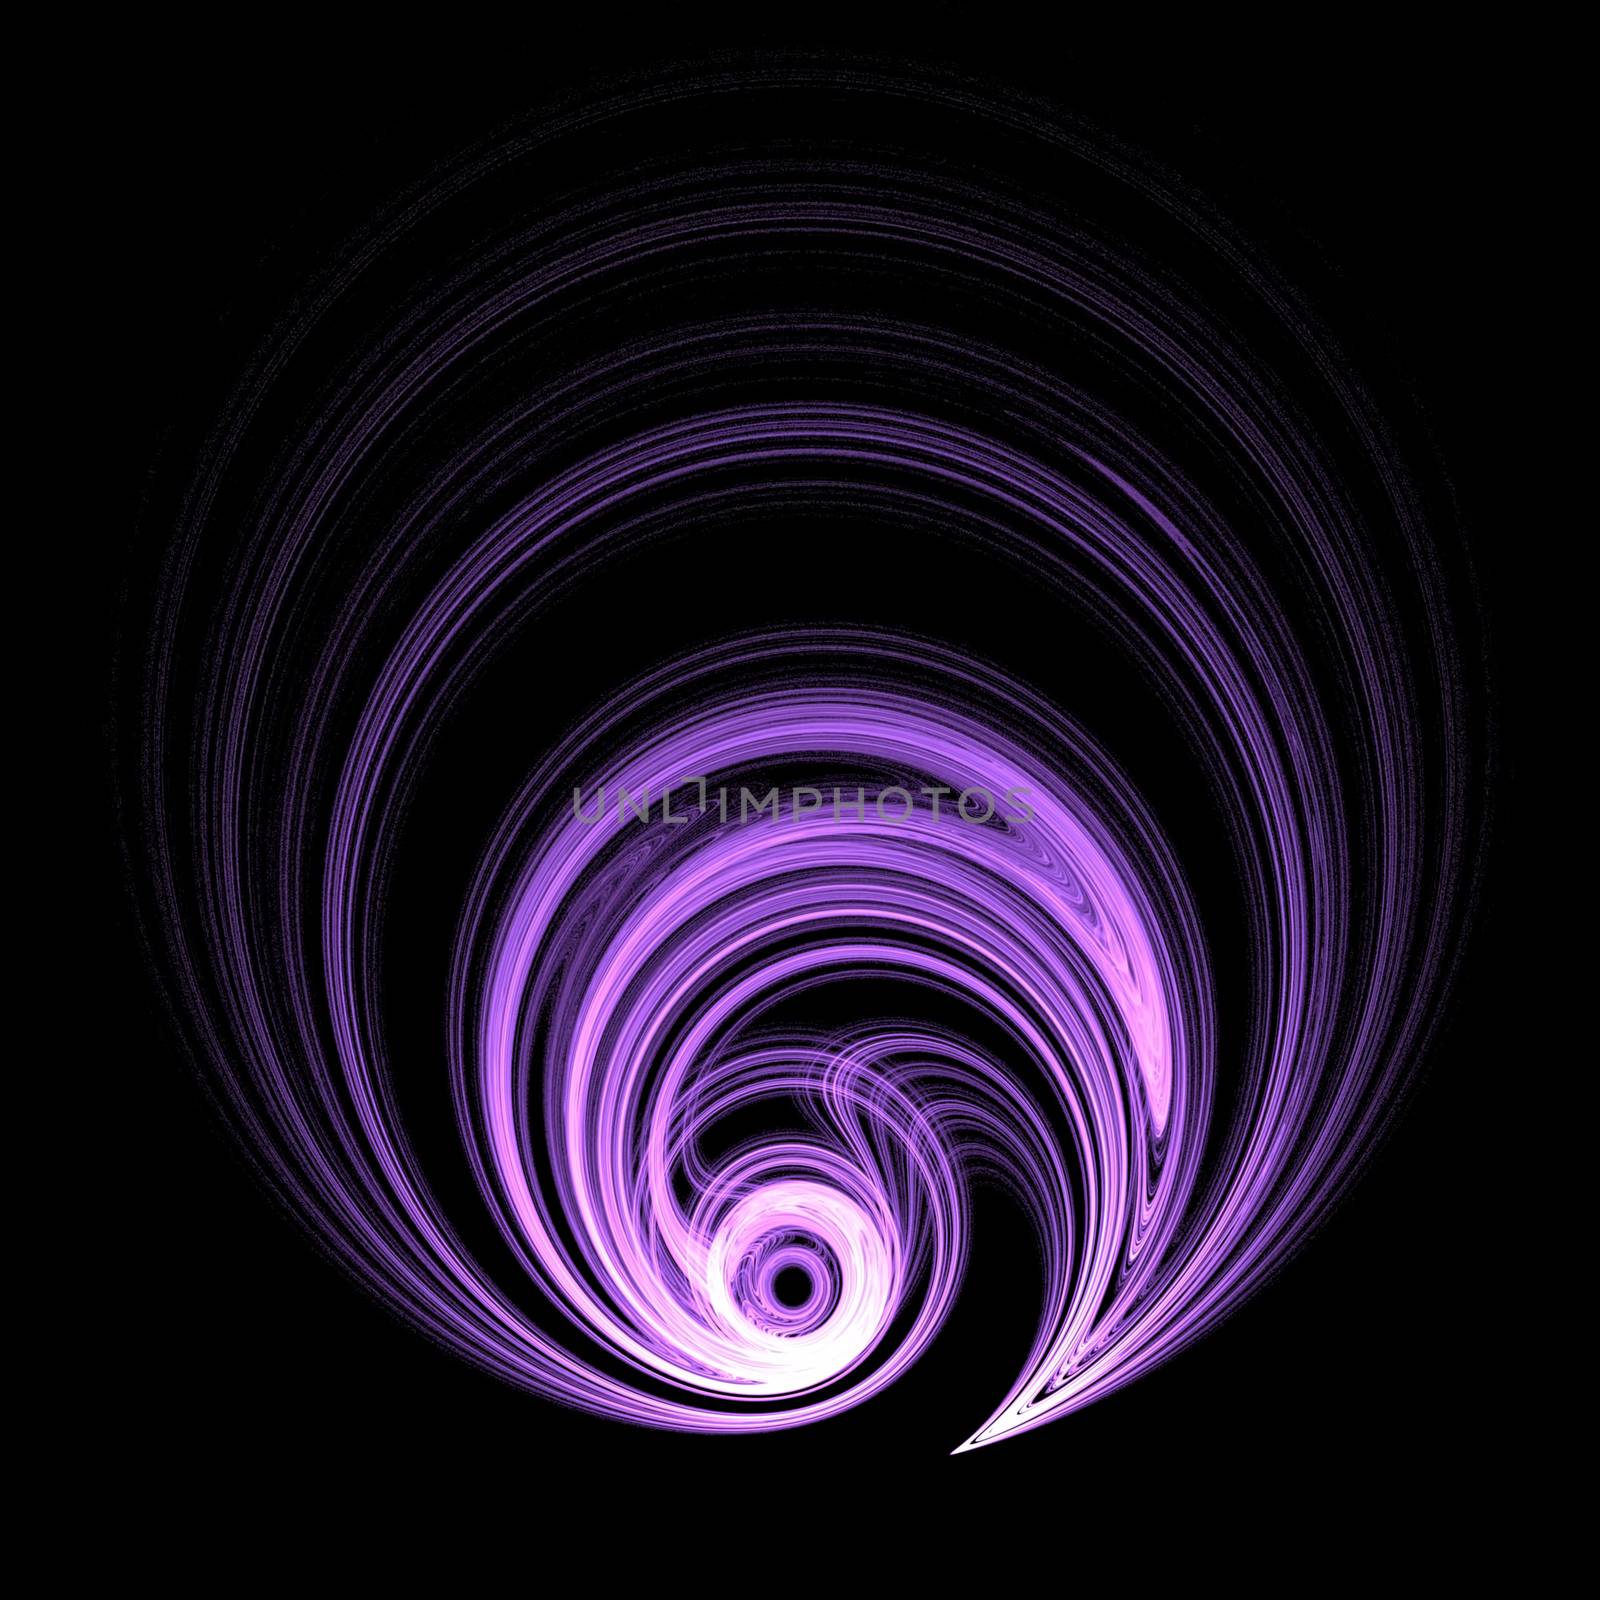 Digital Art: Fractal Graphics: The Time Tunnel. Fantastic Wallpaper / Background / Scene Design. Sci-Fi / Abstract Style.